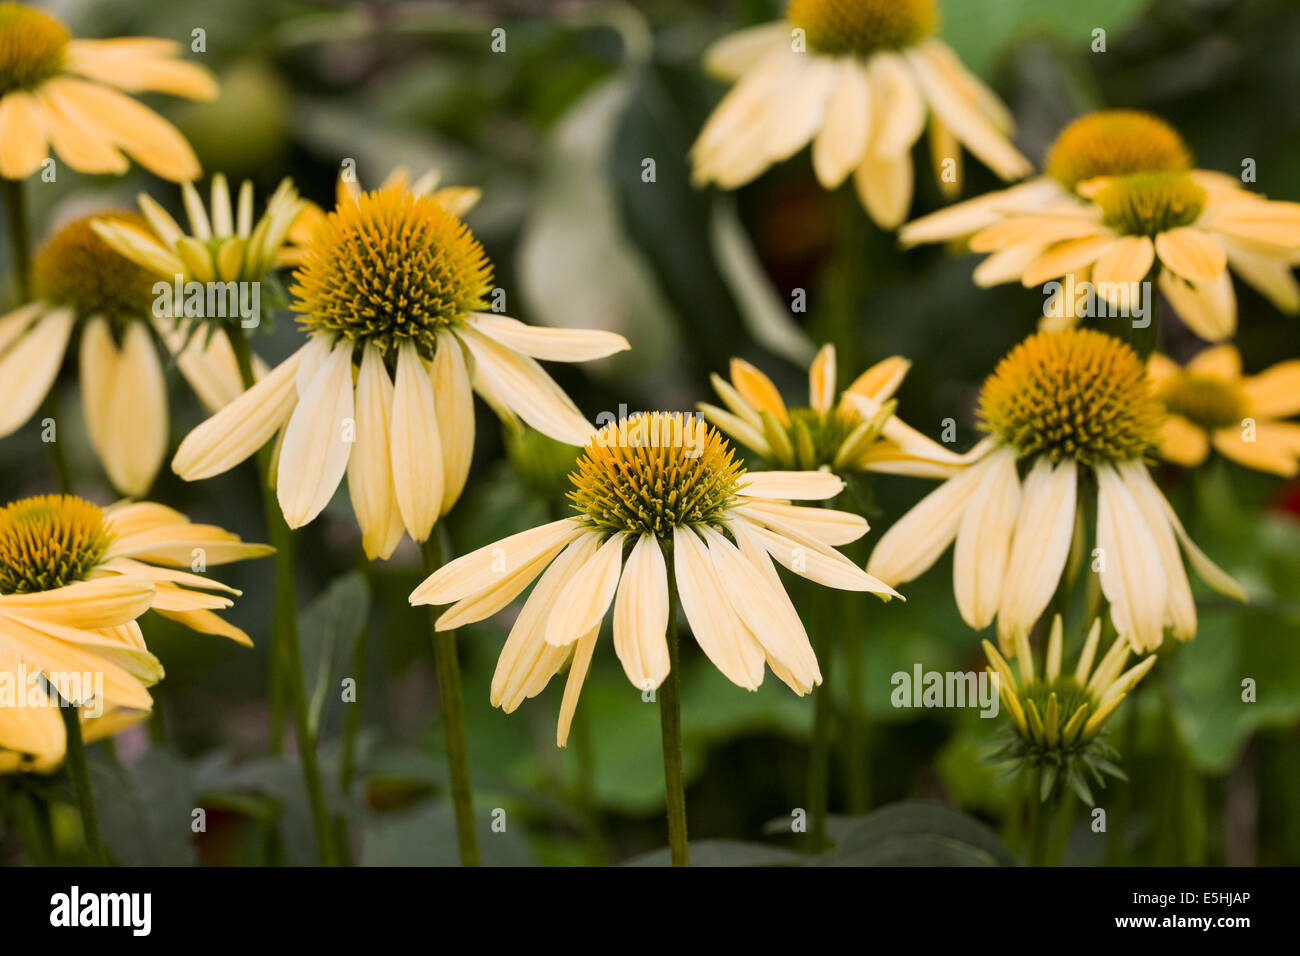 Echinacea 'Amber Mist' flowers. Coneflower in an herbaceous border. Stock Photo